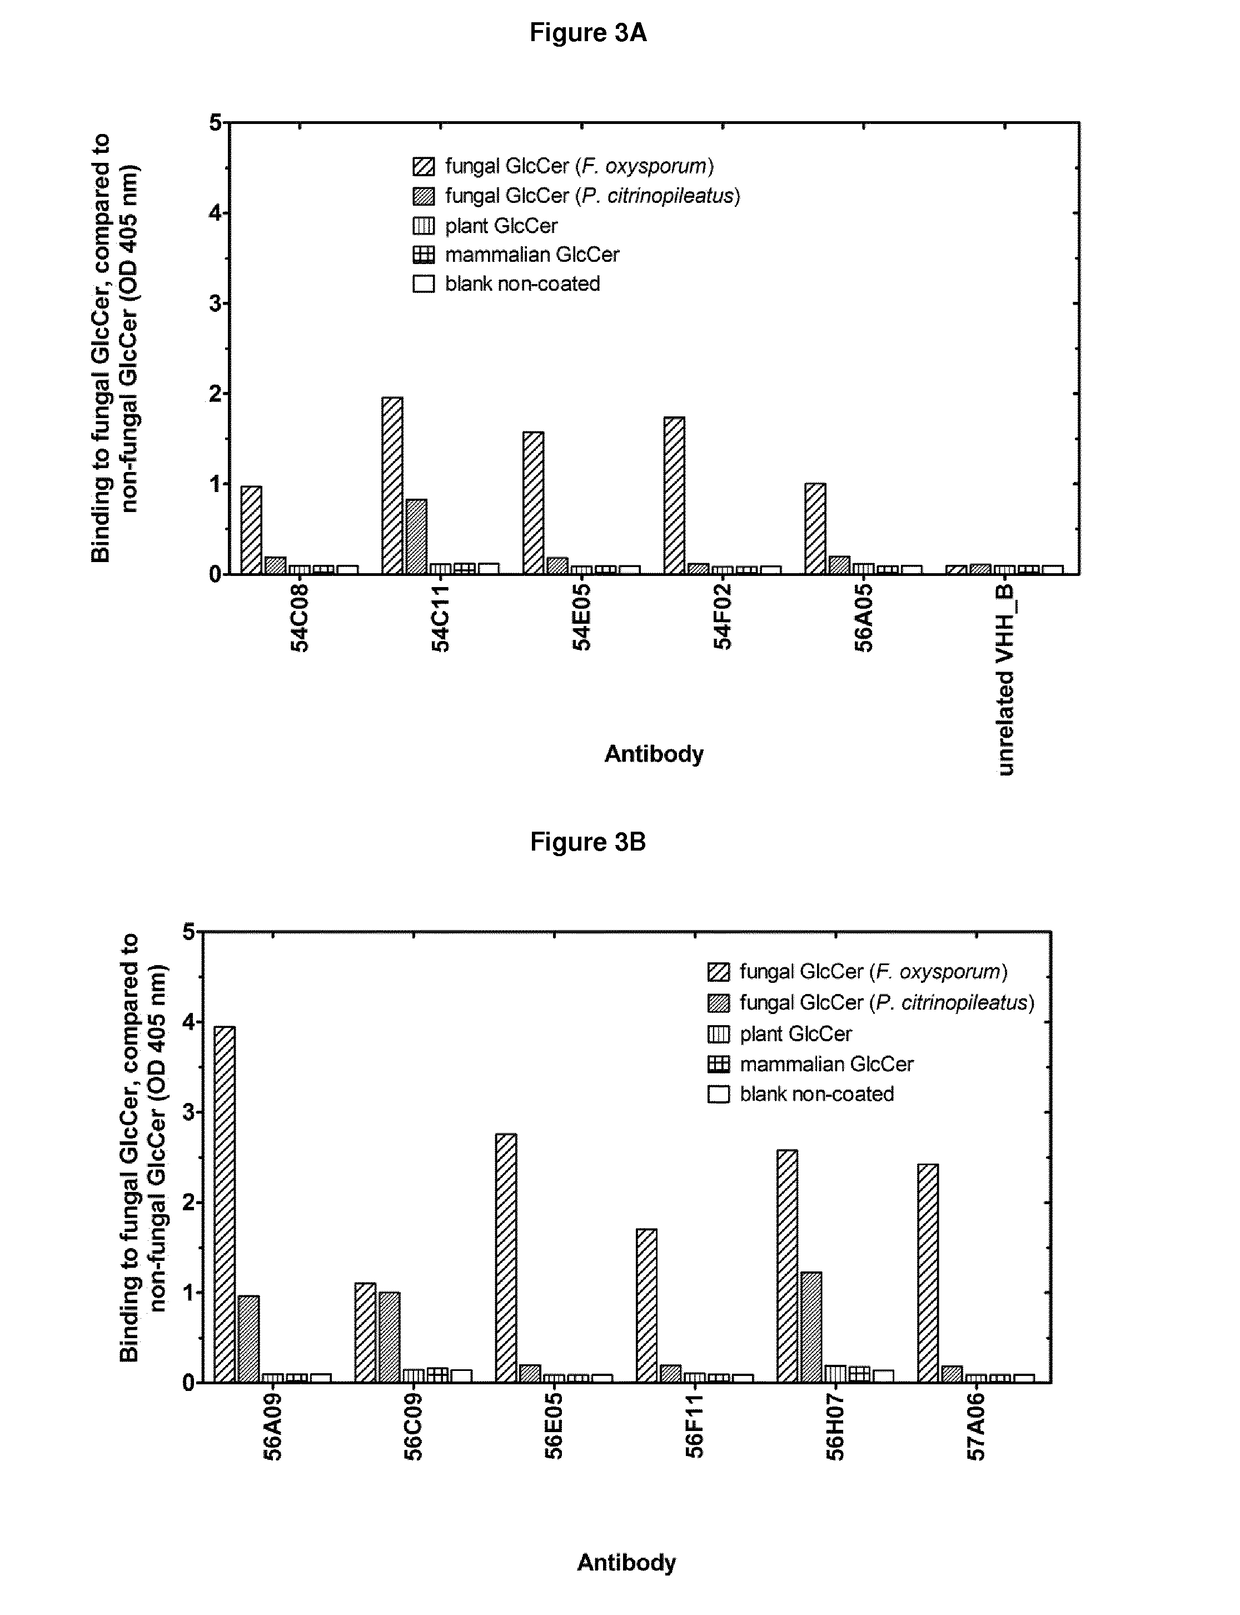 Agrochemical compositions comprising antibodies binding to sphingolipids